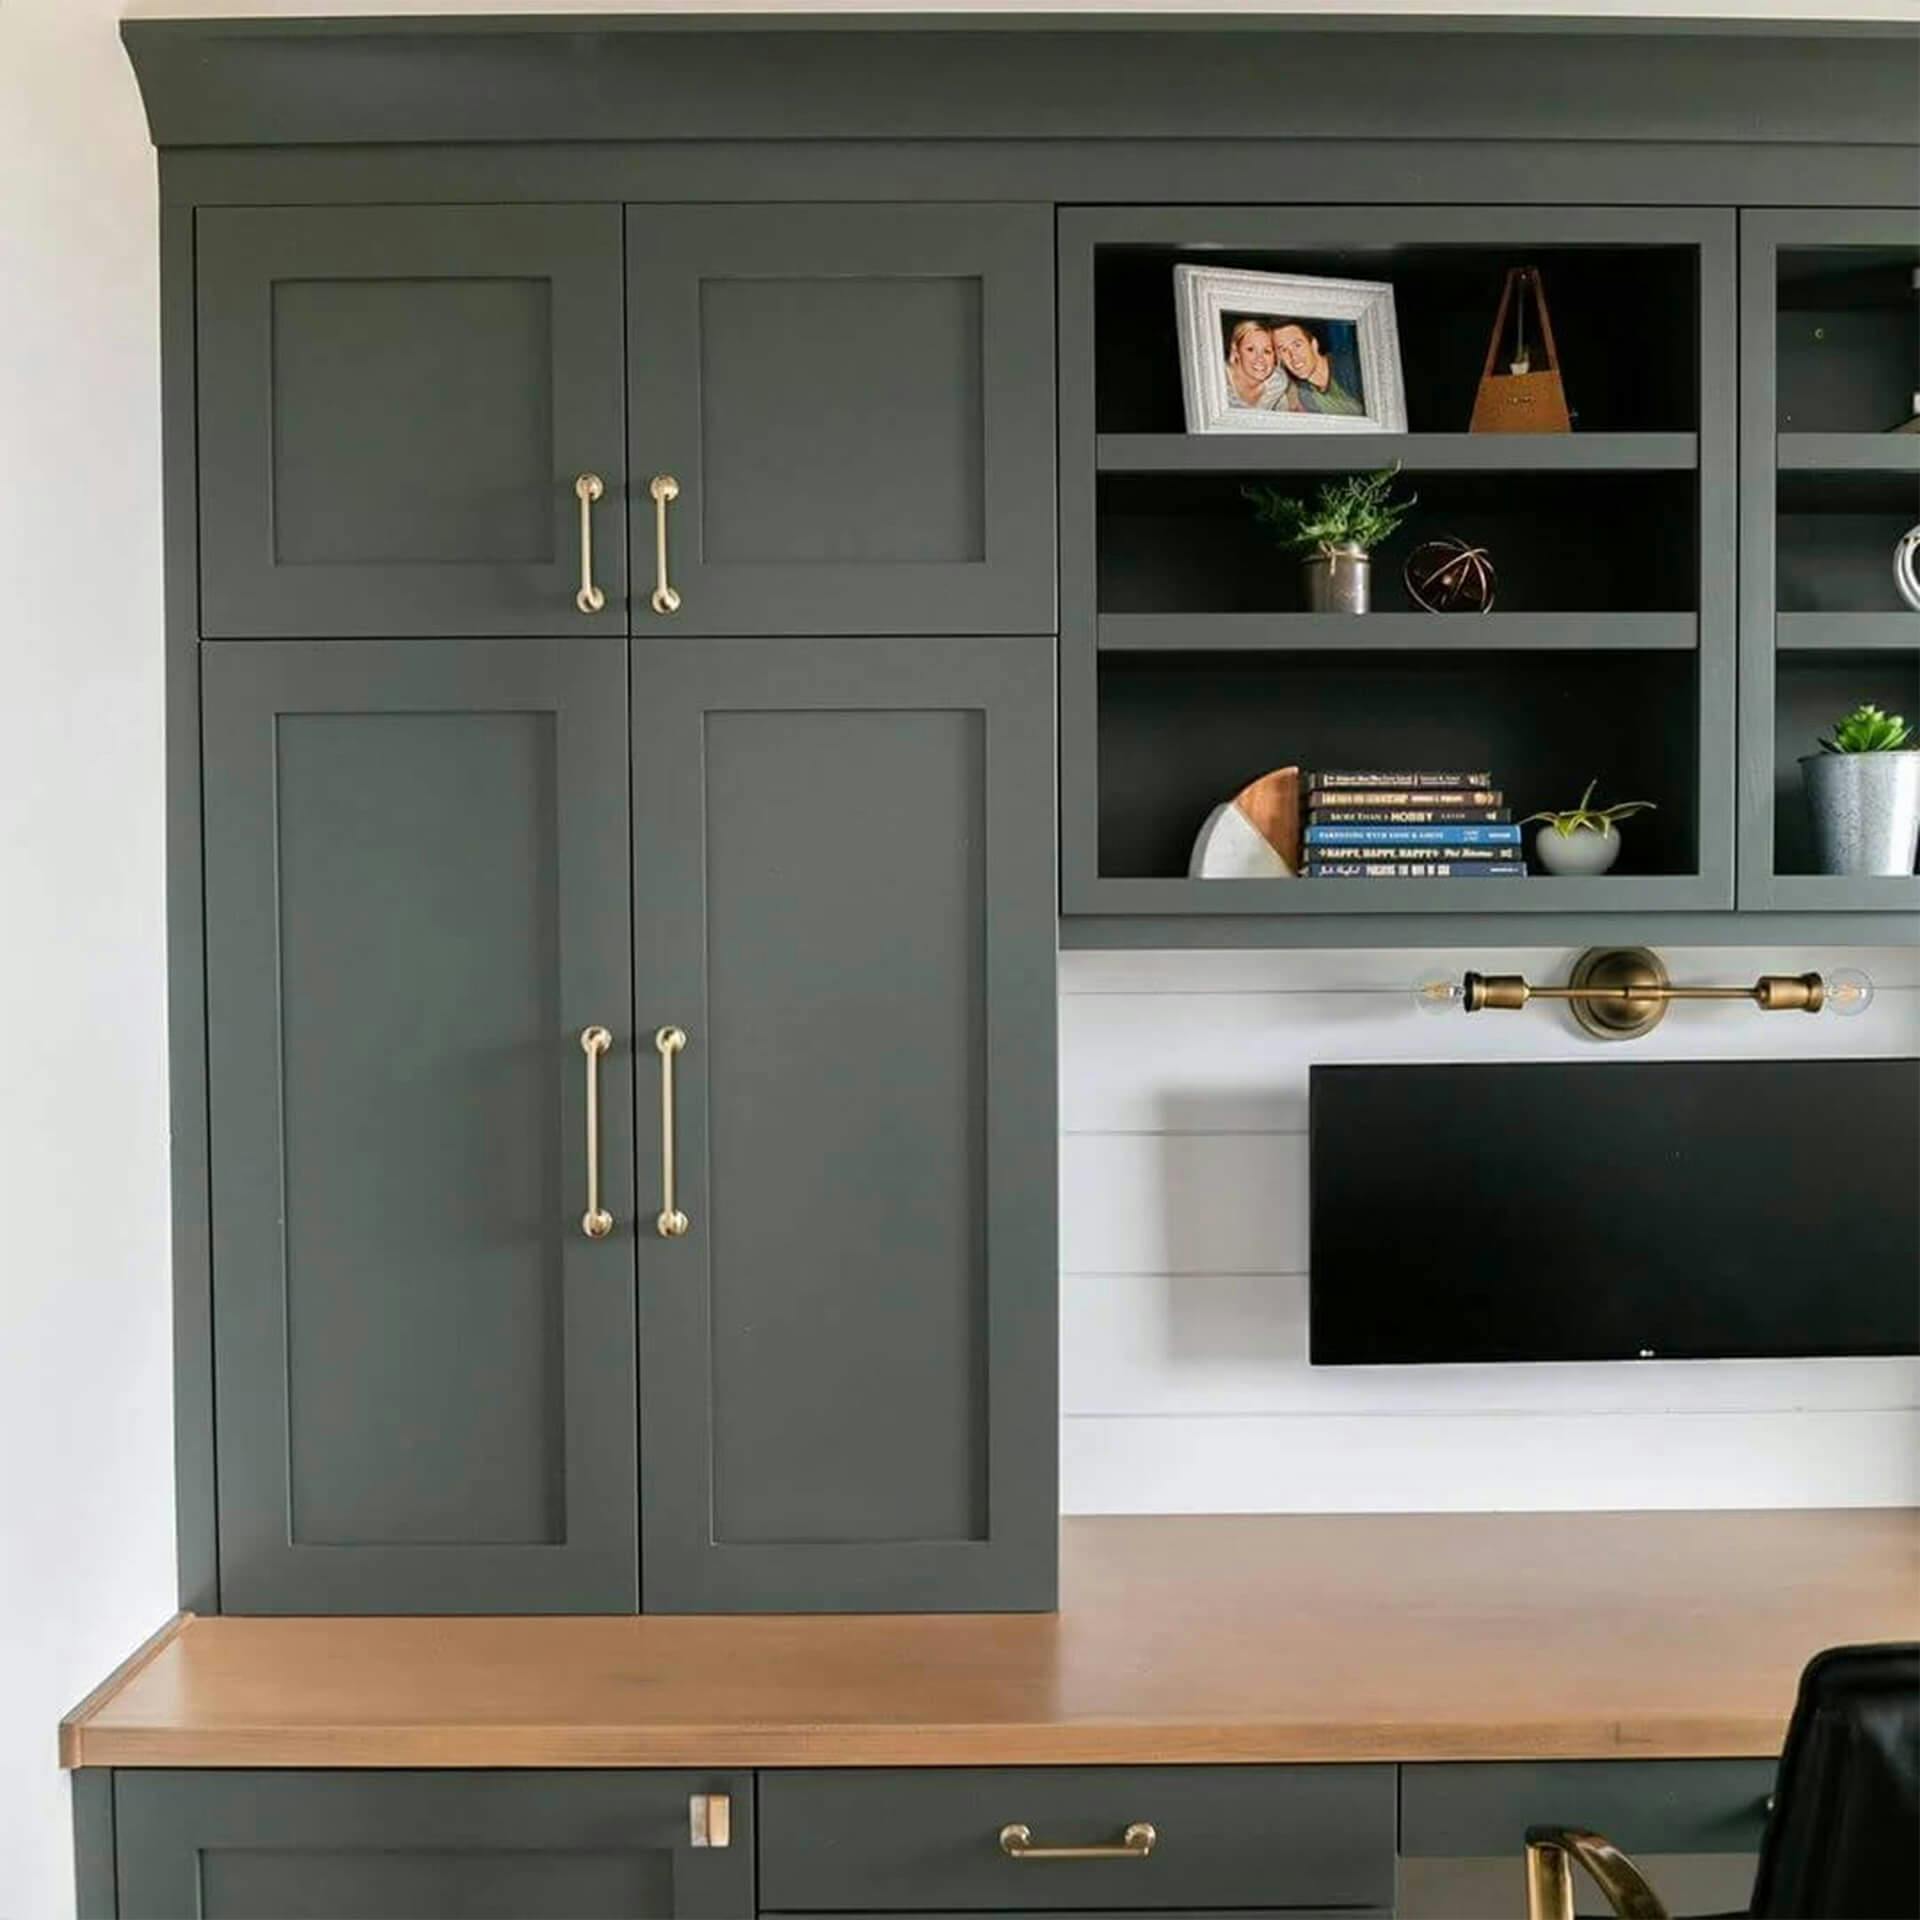 Built in green cabinets surround a desk space